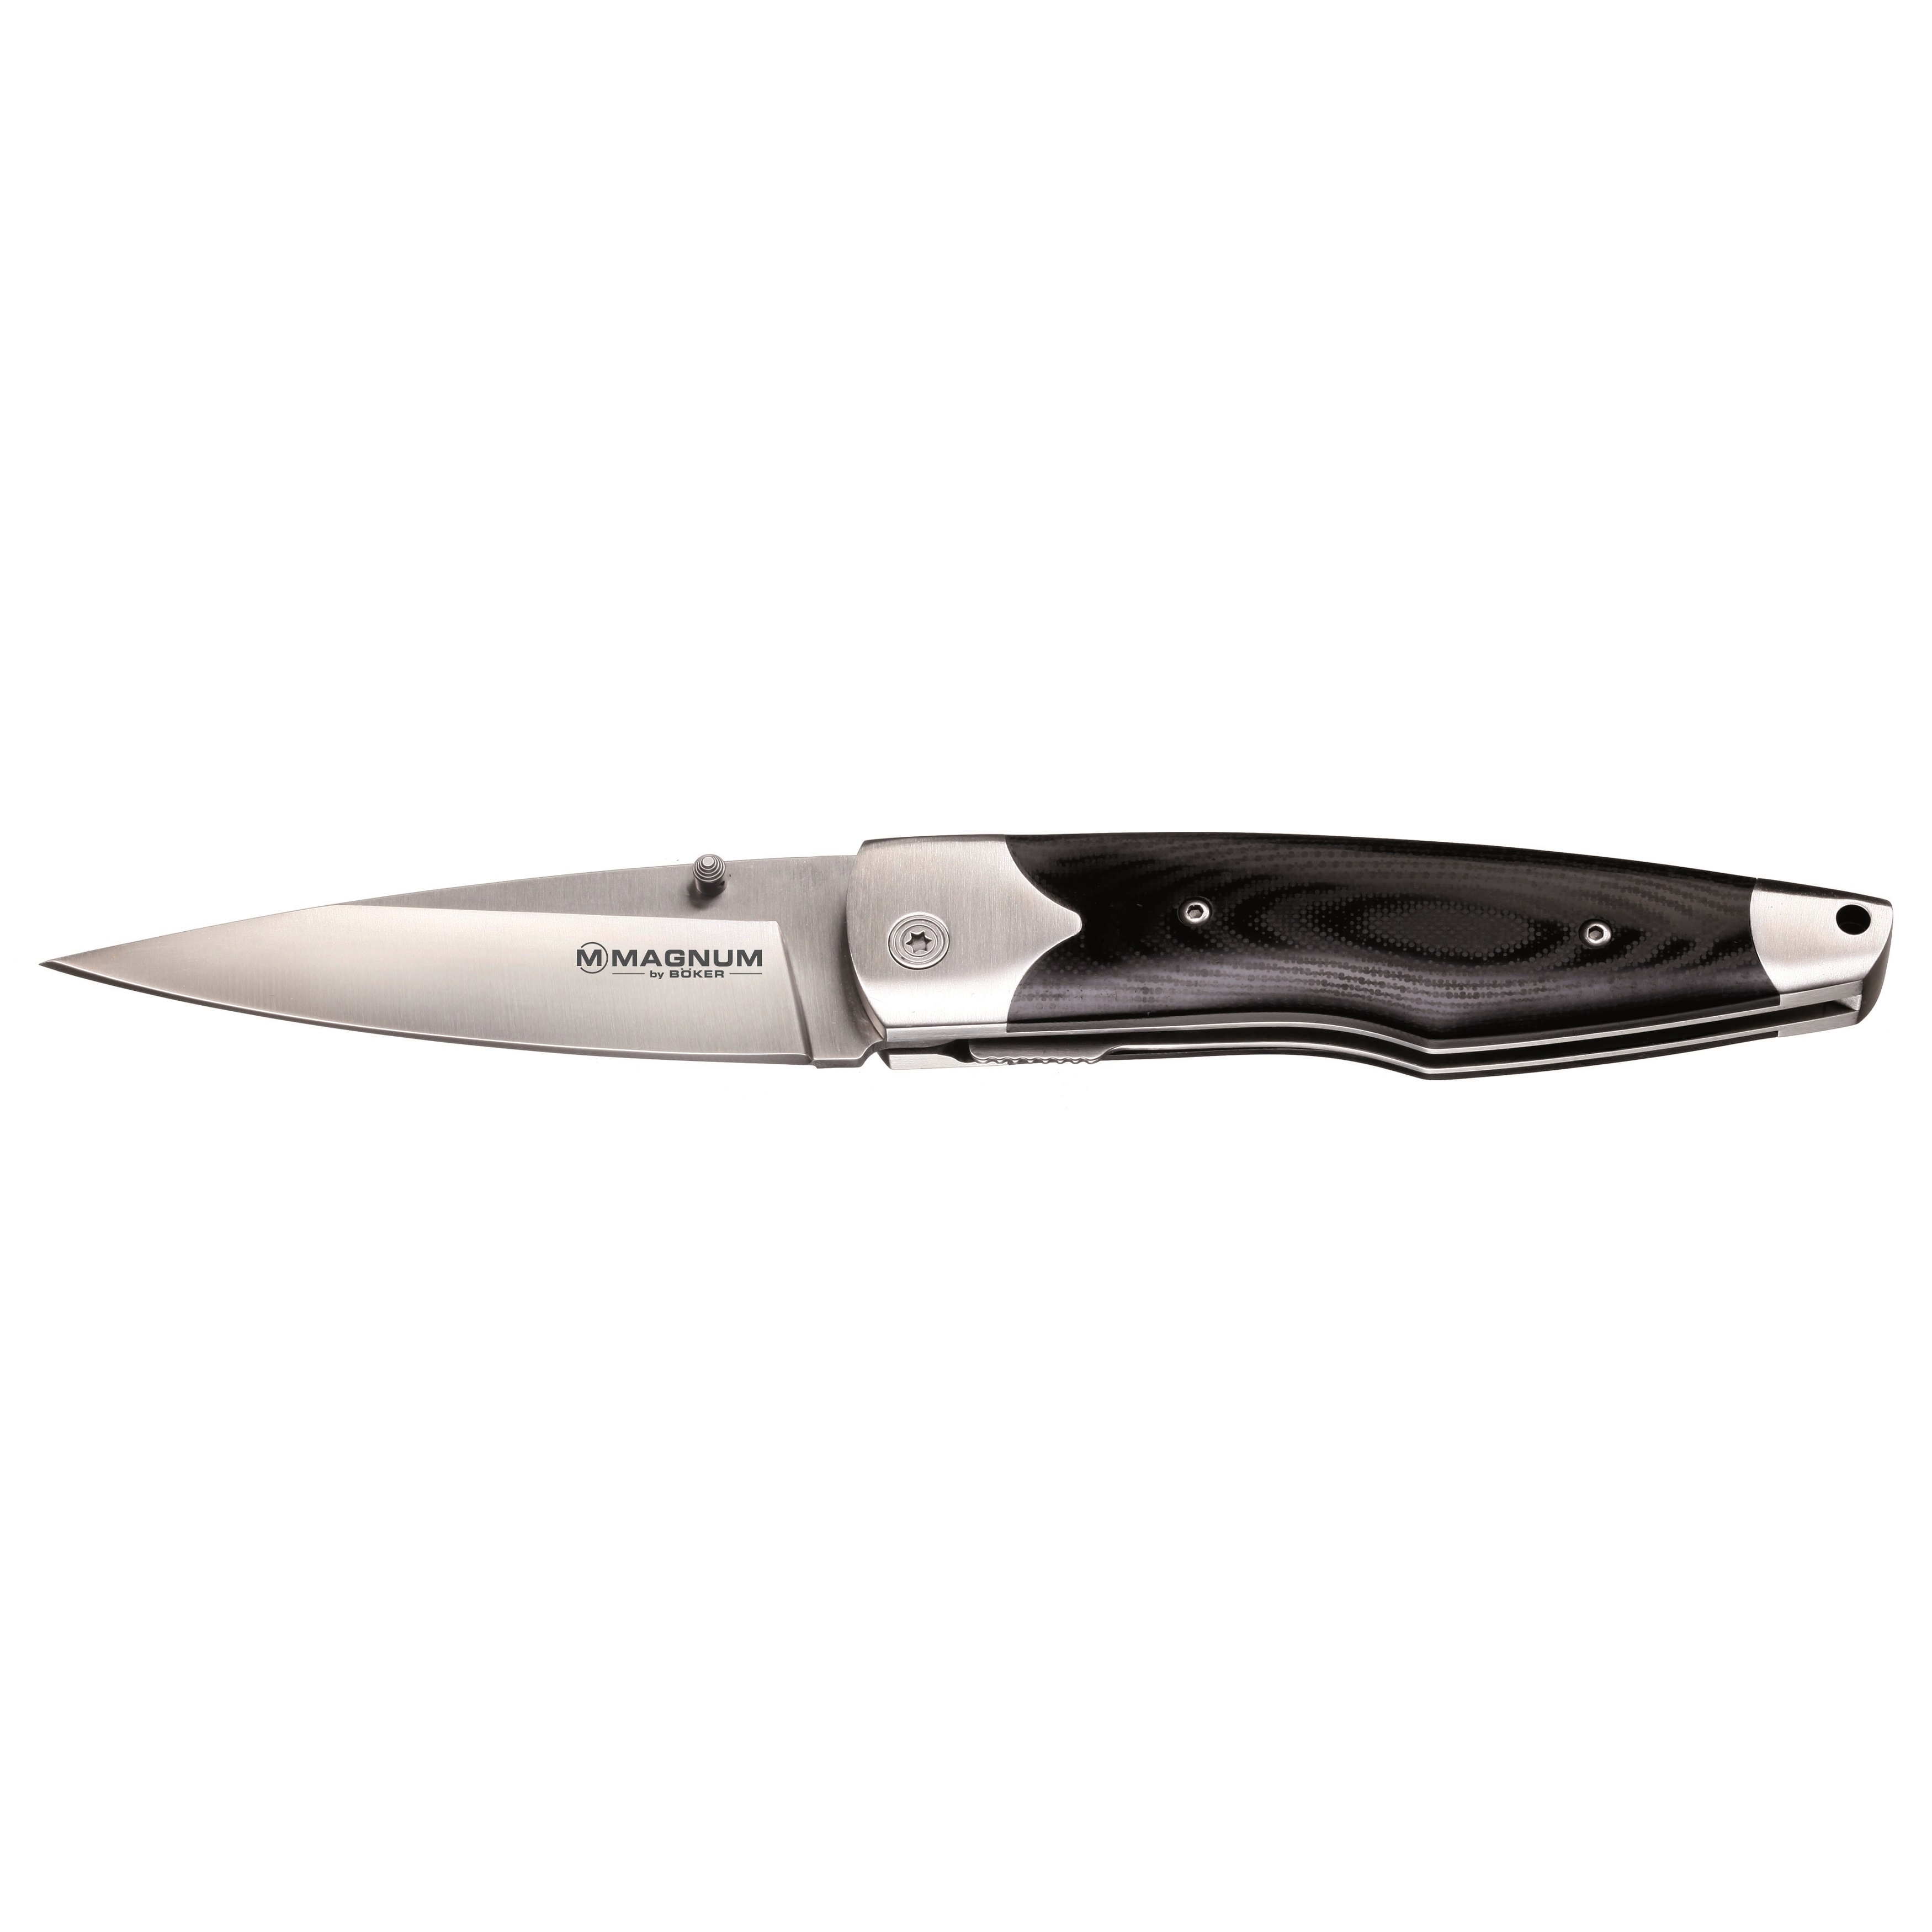 Boker Magnum Milan Tactical Pocket Knife (BlackBlade materials 440 stainless steelHandle materials Stainless steel/MicartaBlade length 3.875 inchesHandle length 4.875 inchesWeight 5.5 ouncesDimensions 8.75 inches high x 1 inch wide x 0.25 inch deepB